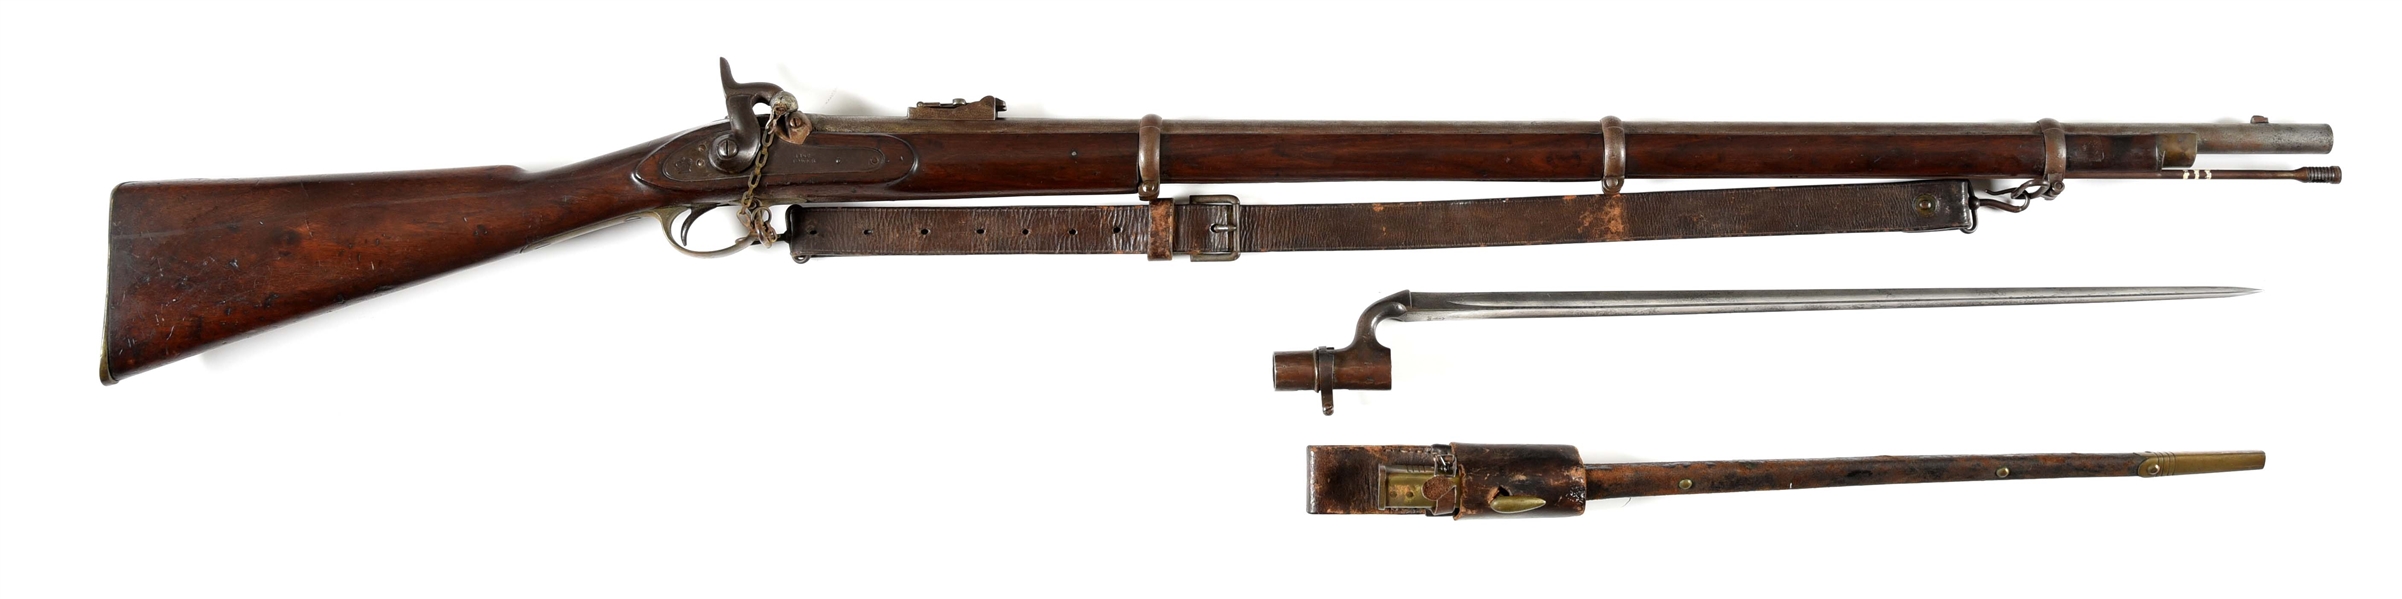 (A) TOWER P-1853 ENFIELD PERCUSSION MUSKET WITH BAYONET.